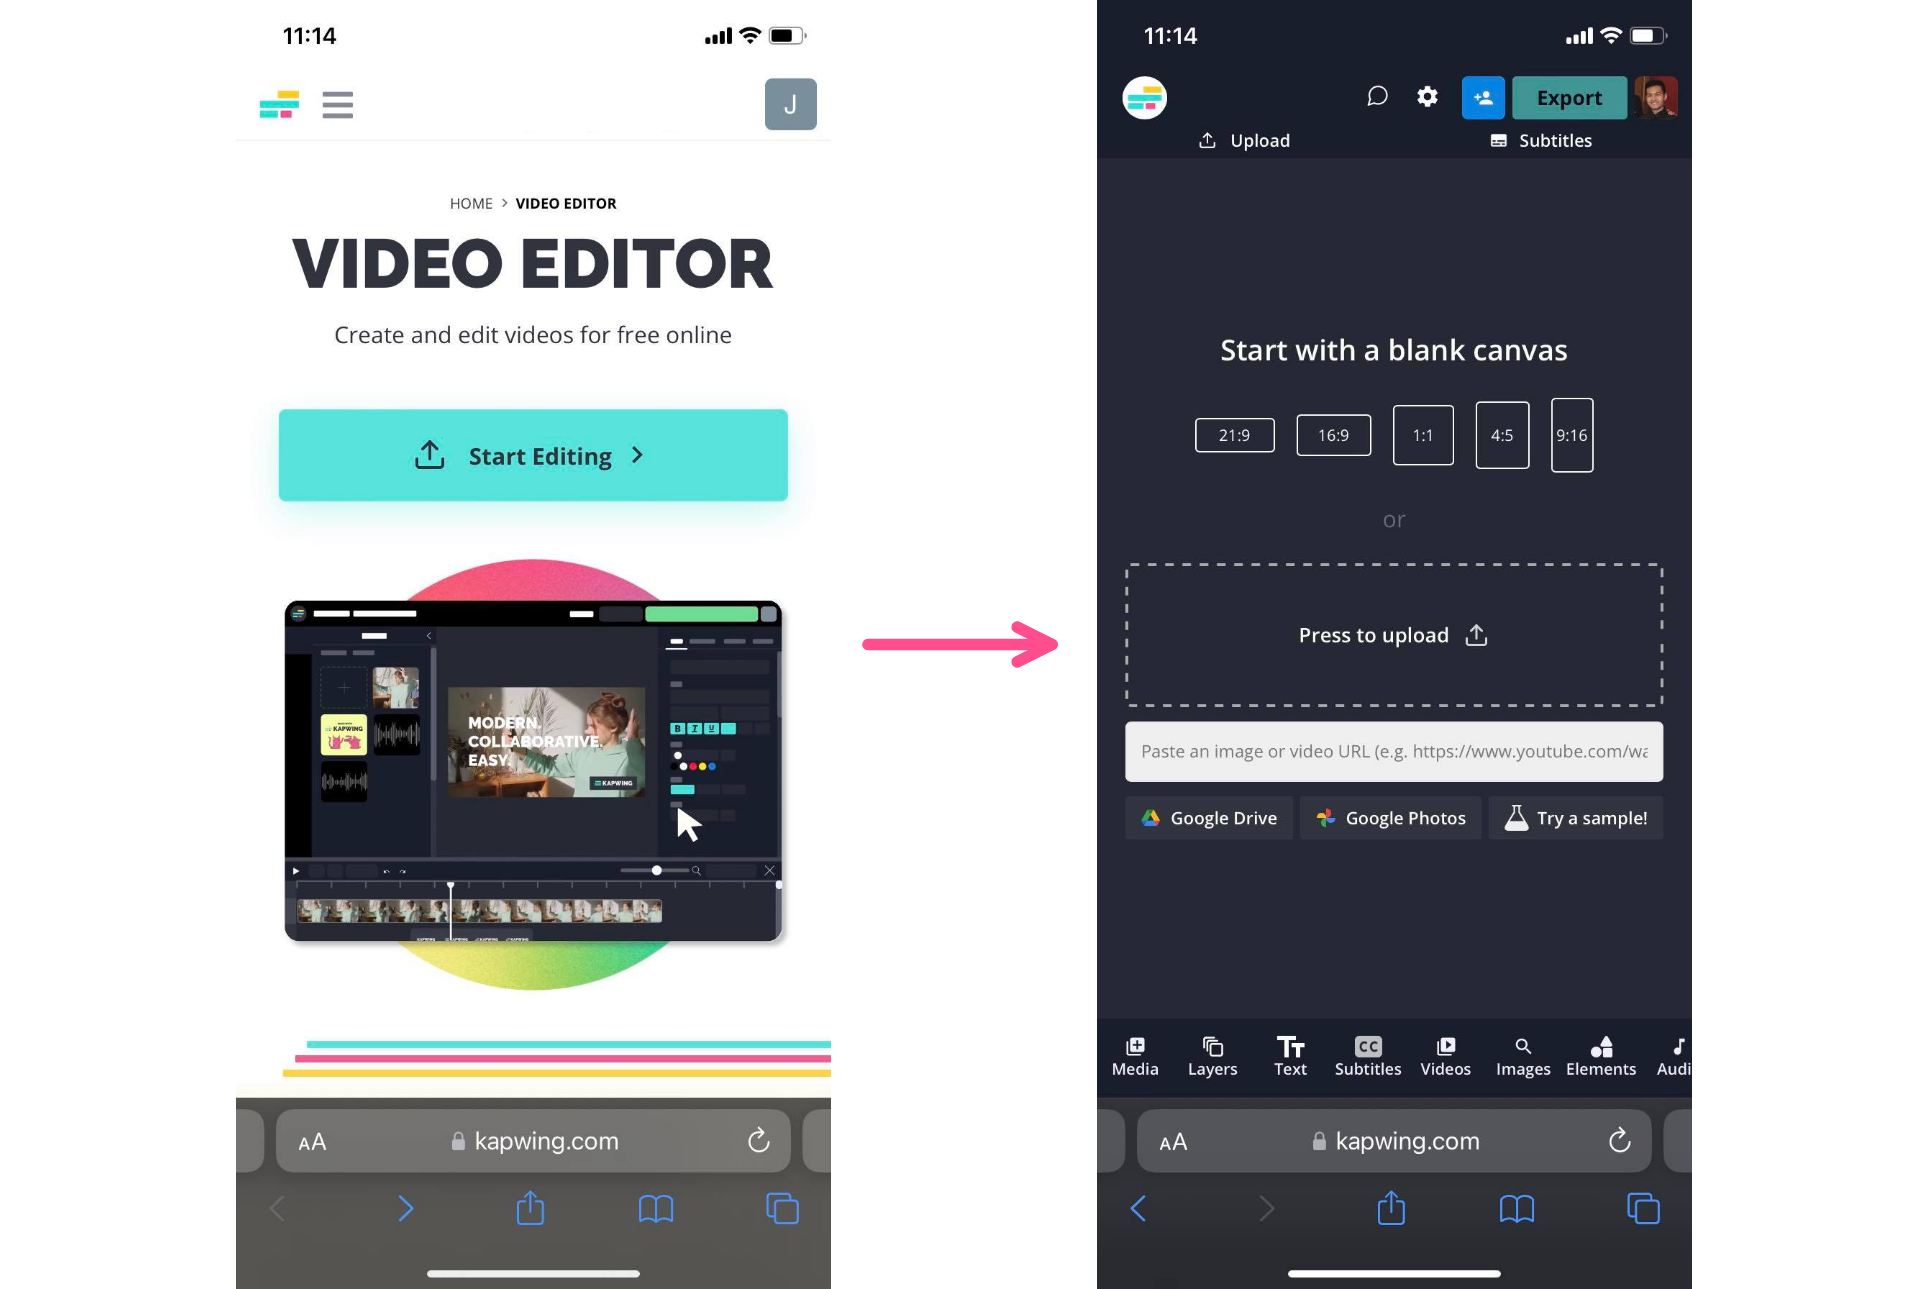 Screenshots showing how to upload a video to Kapwing